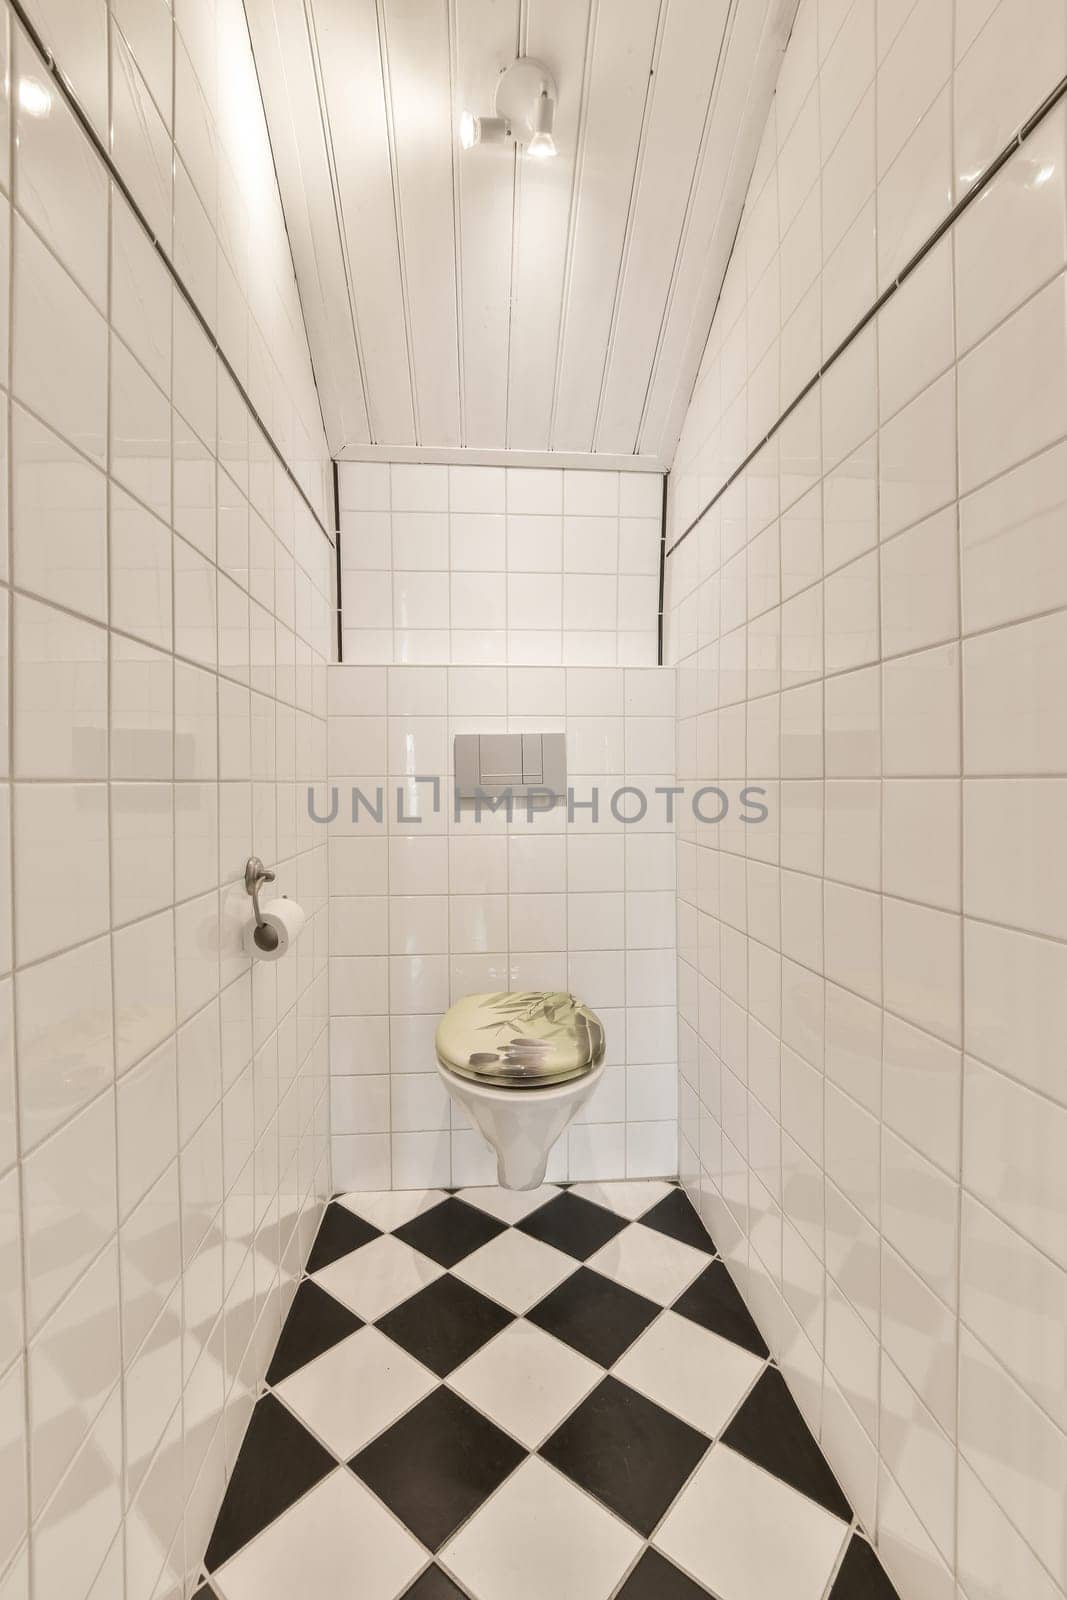 a tiled bathroom with black and white tiles on the floor, along with an open toilet in the center of the room